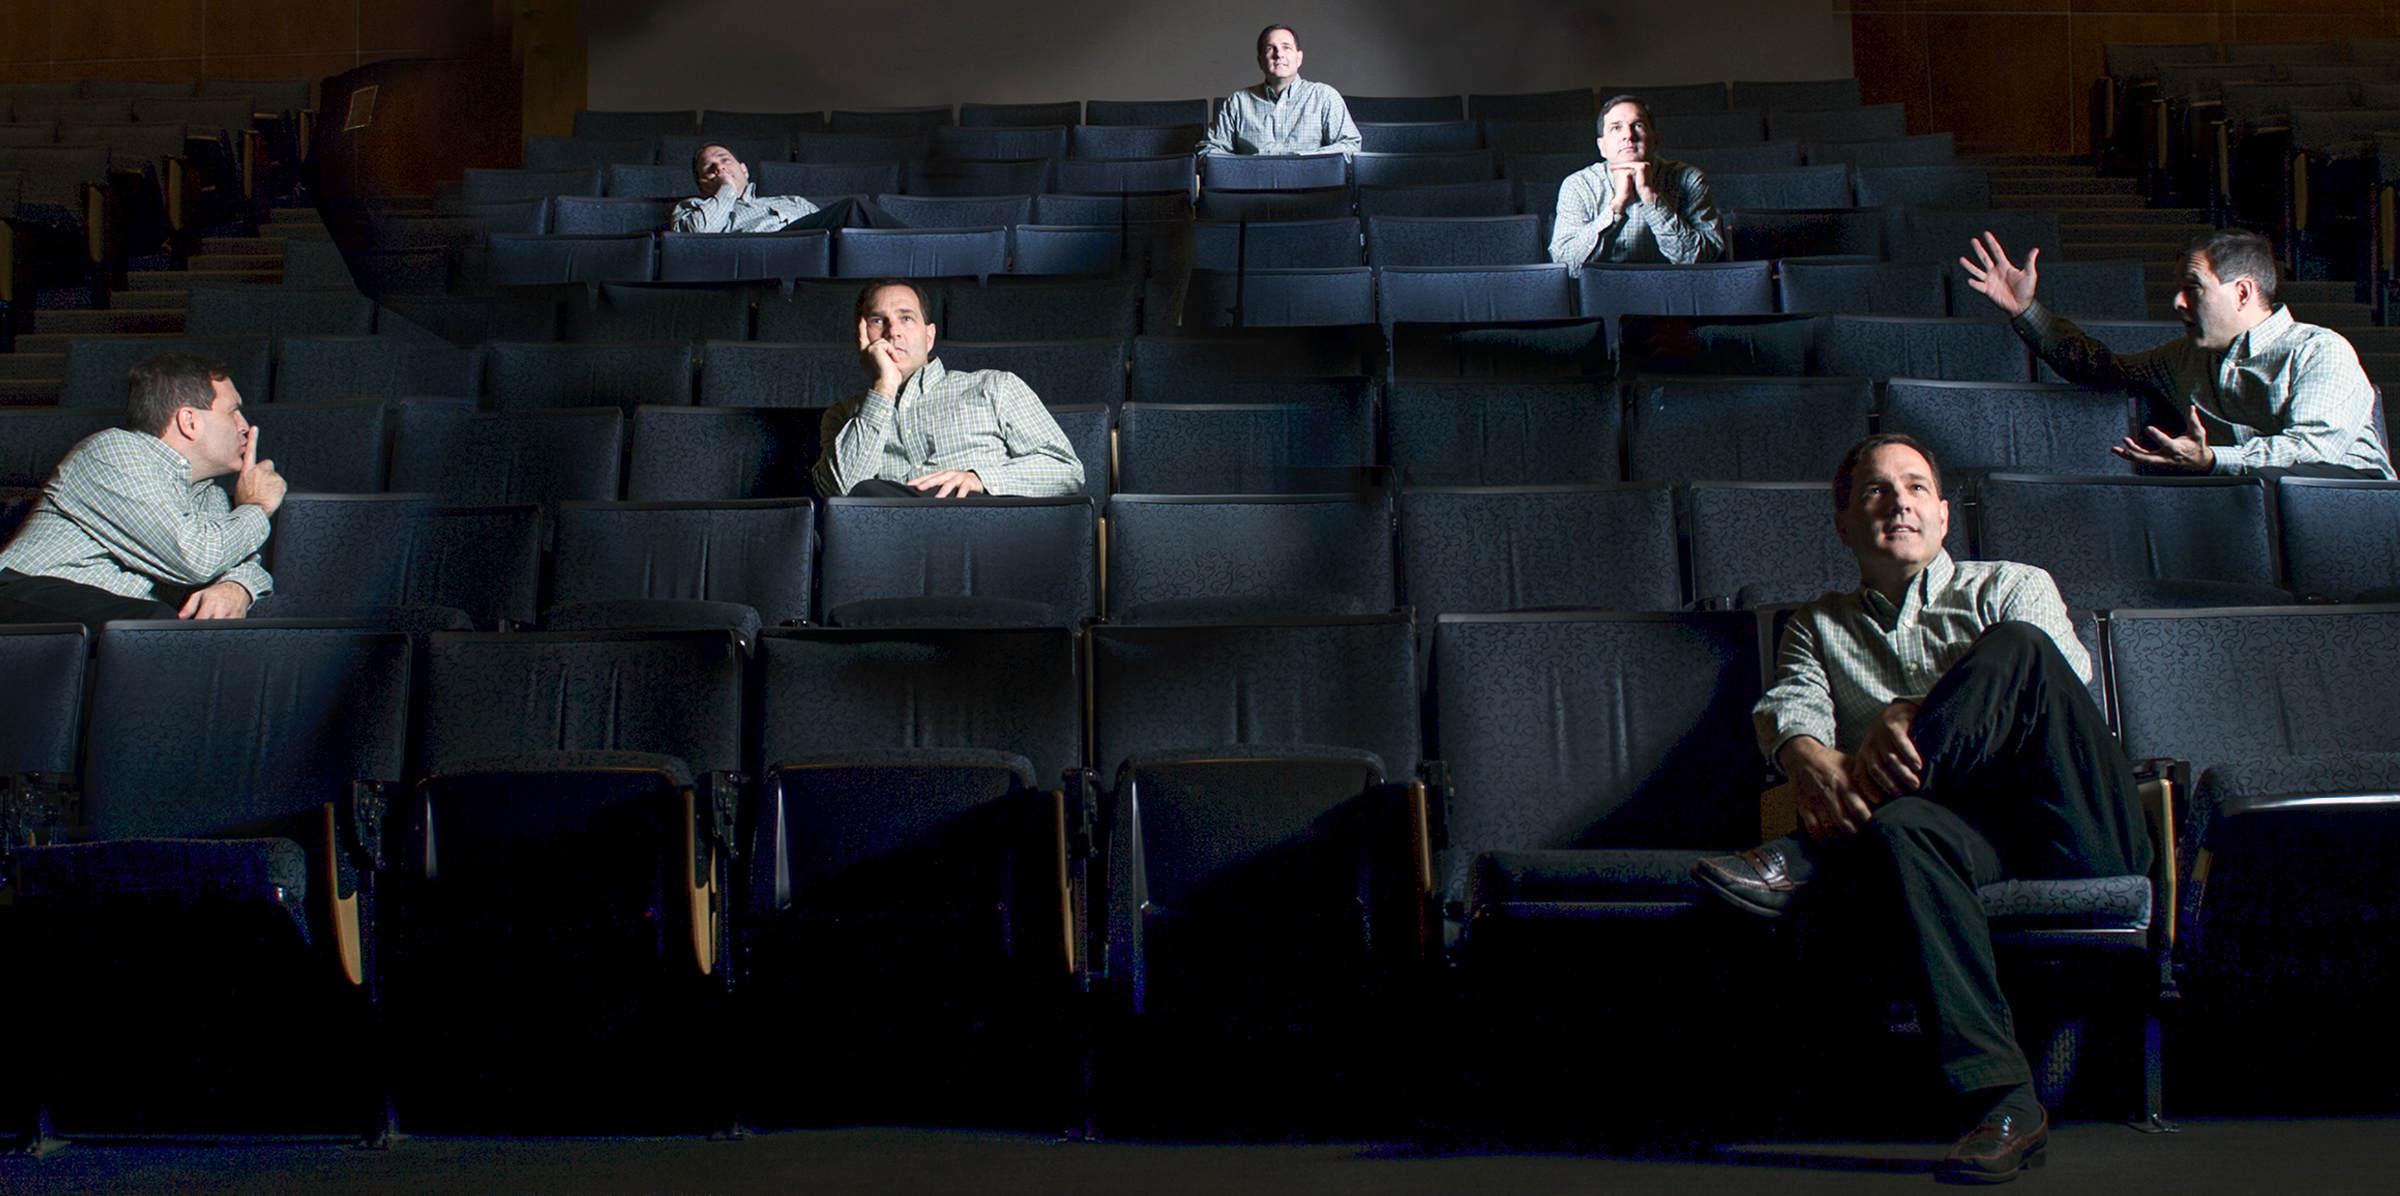 Composite picture of man in different poses in theater seats